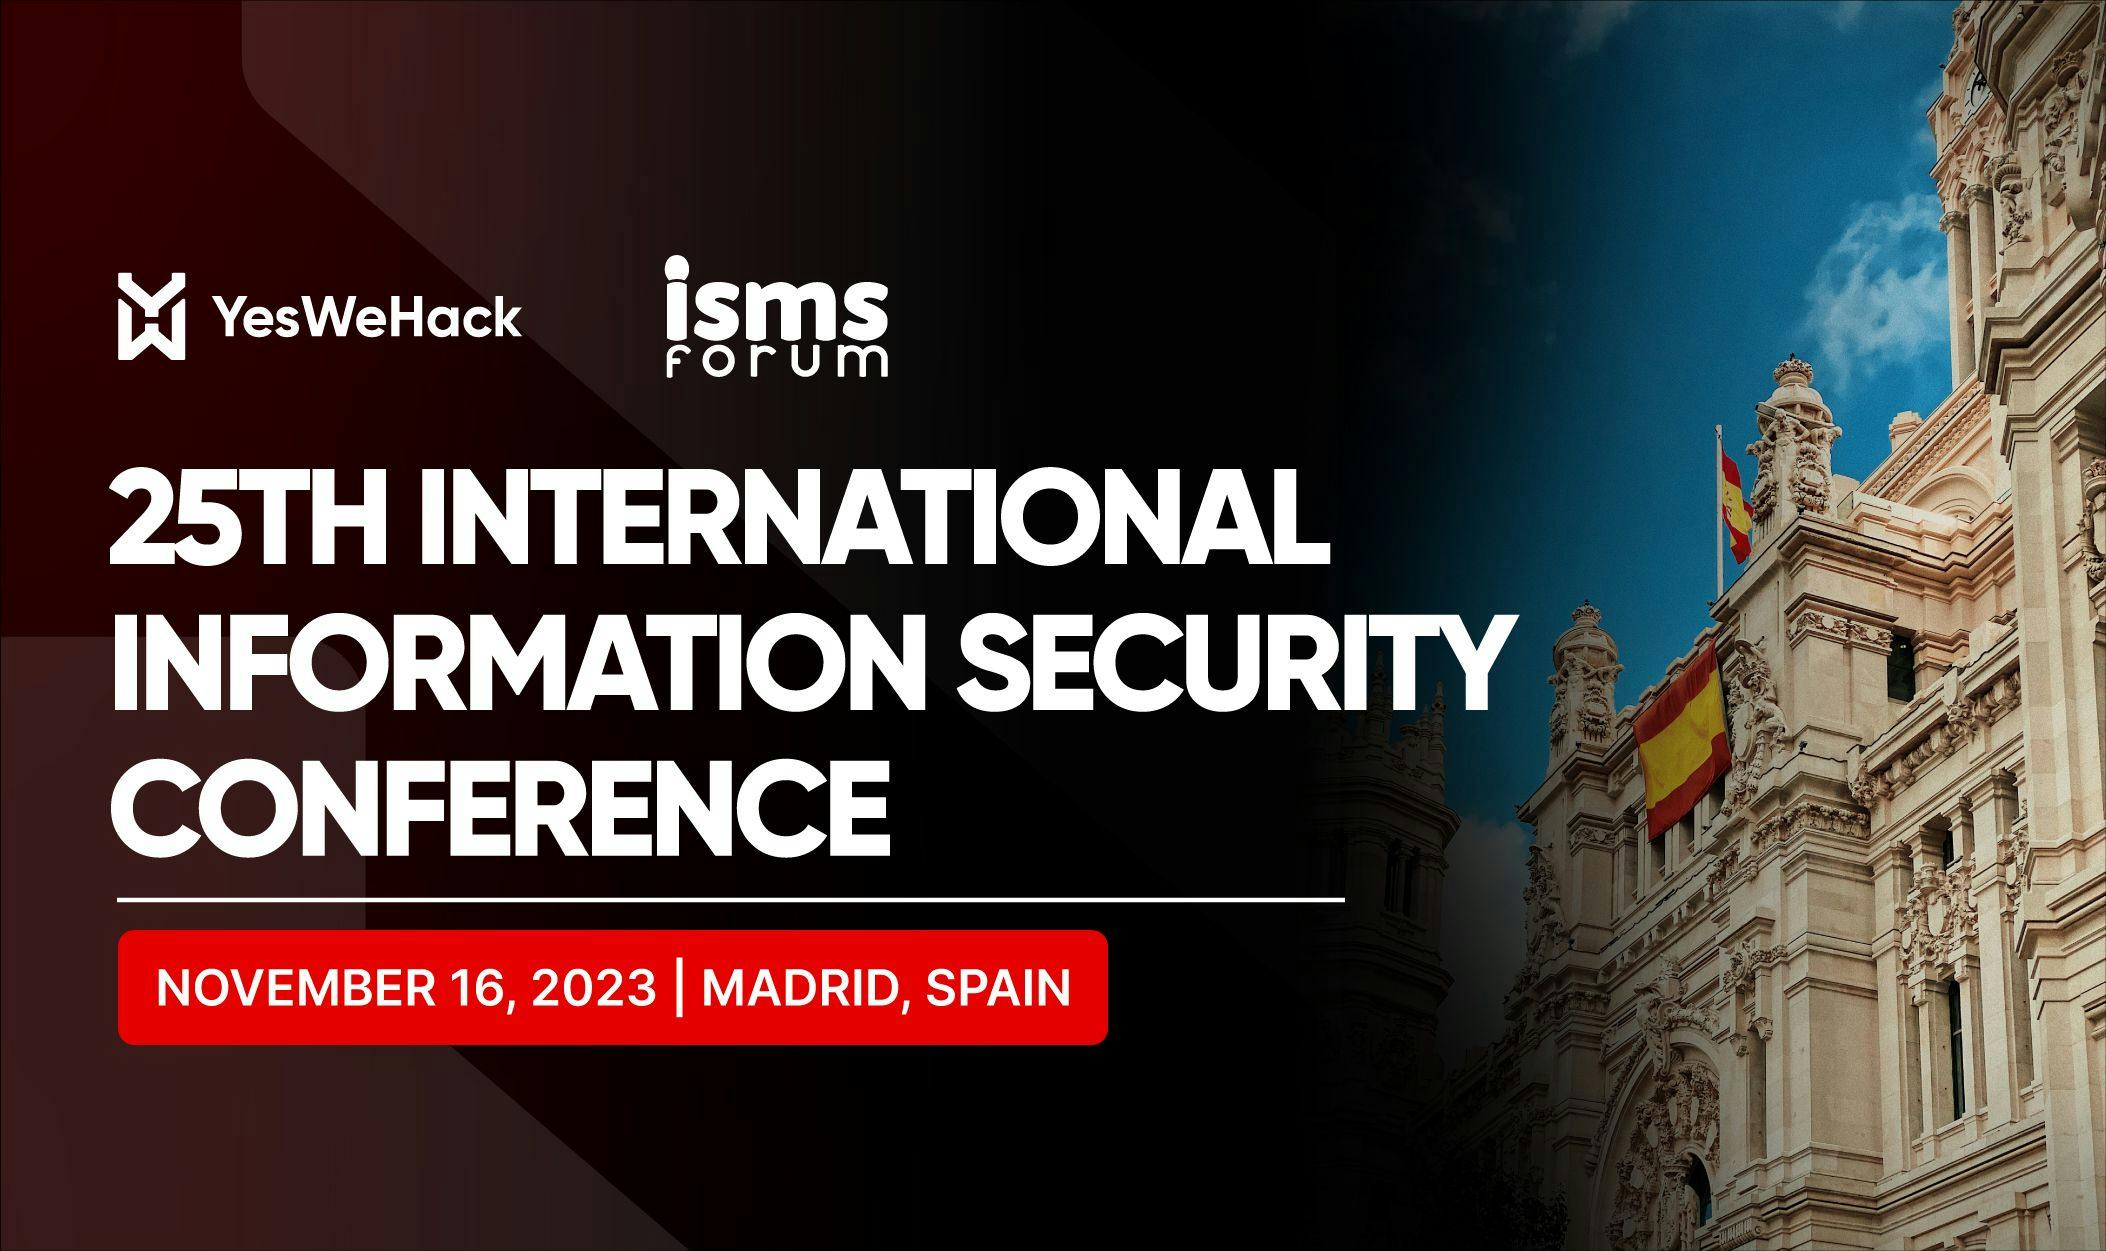 YesWeHack at the 25th International Information Security Conference by ISMS Forum